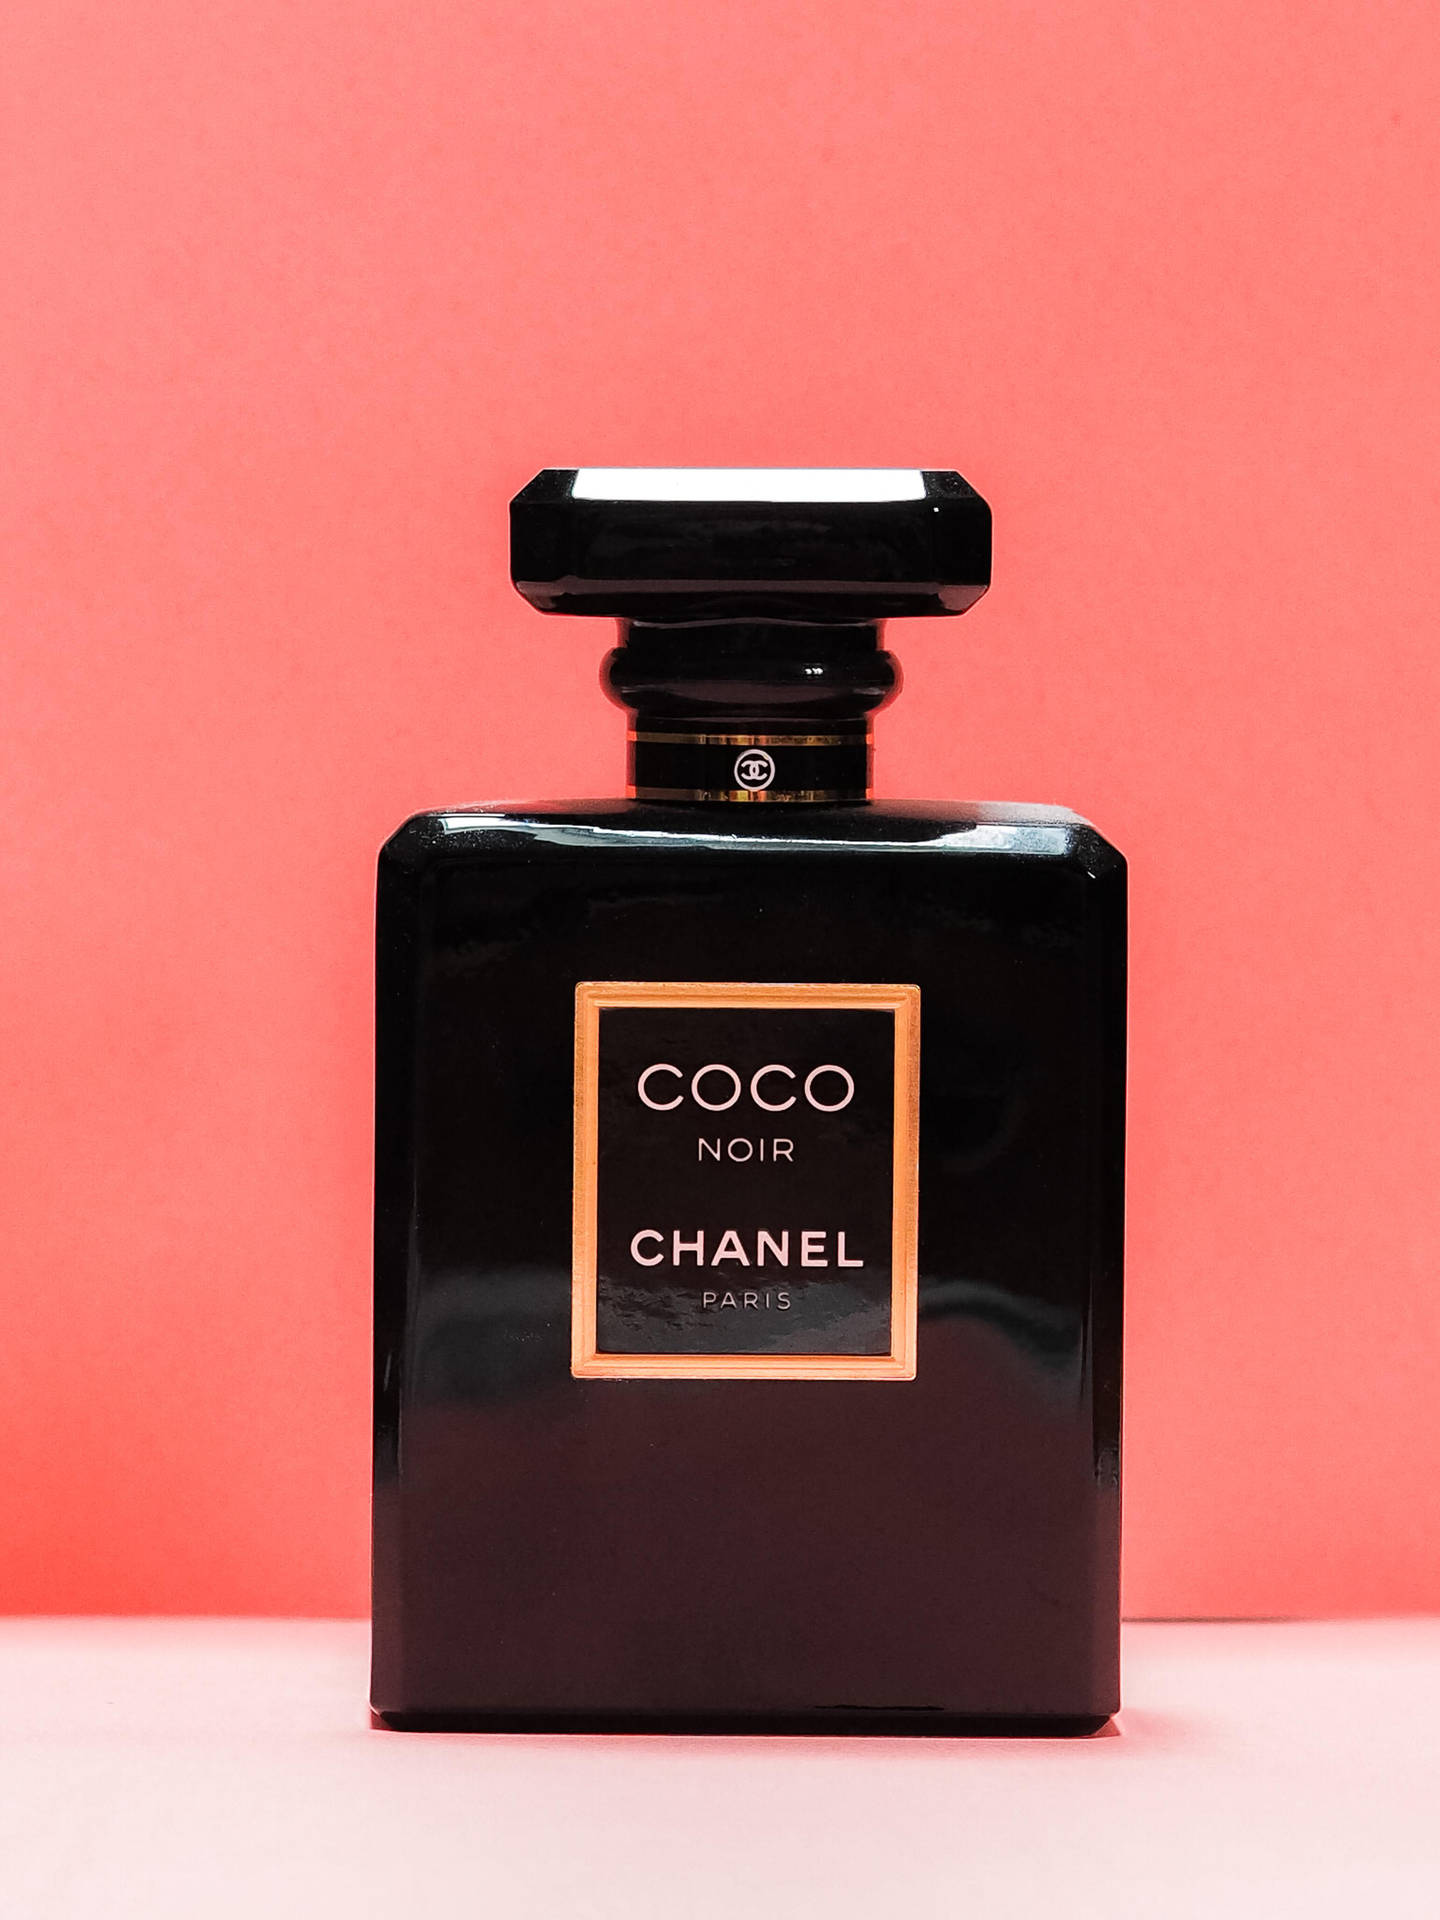 Coco Noir Chanel Pink Aesthetic Background